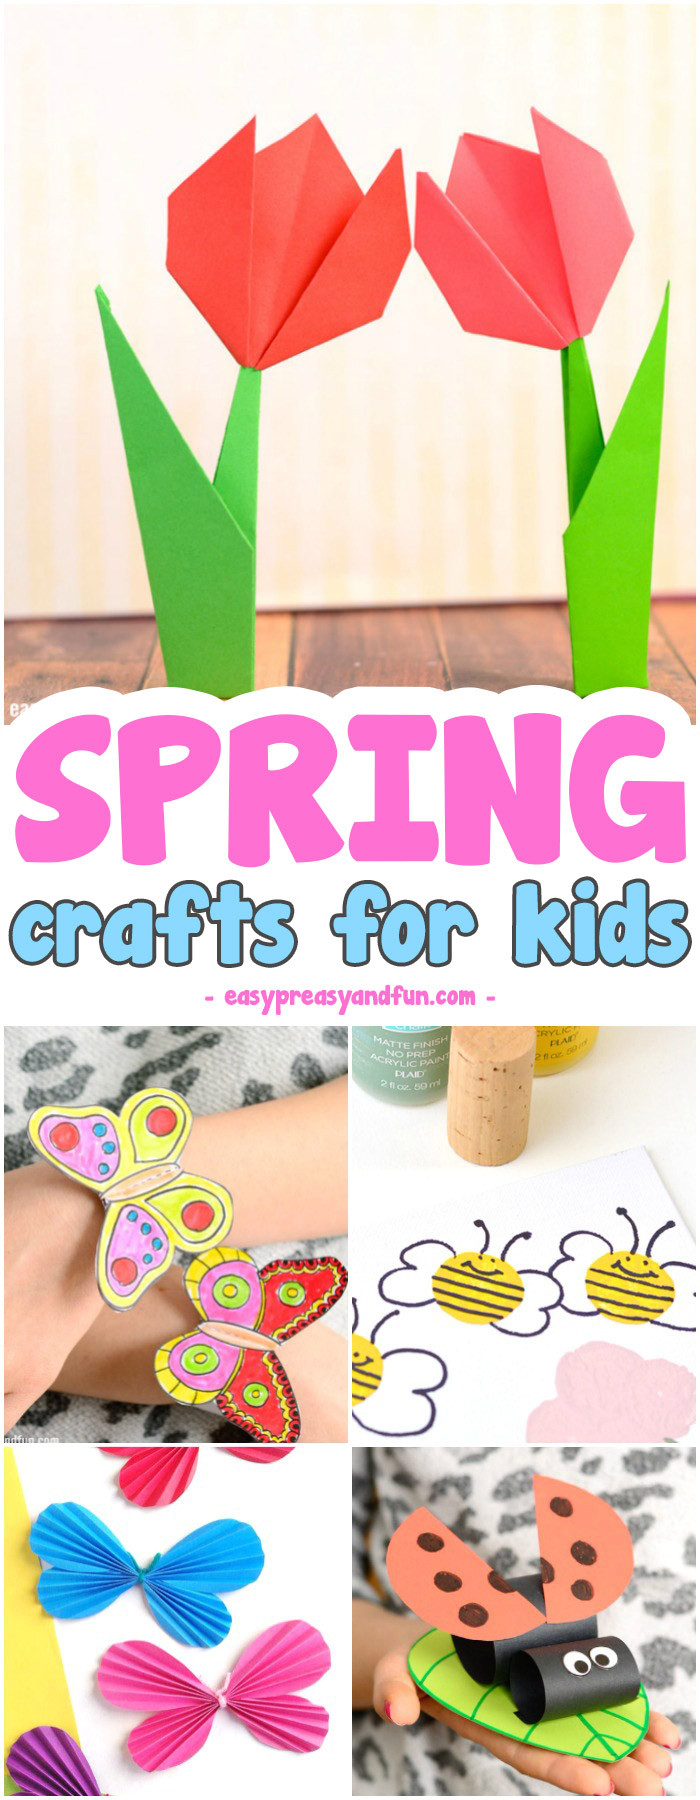 Easy Craft Ideas For Kids At School
 Spring Crafts for Kids Art and Craft Project Ideas for